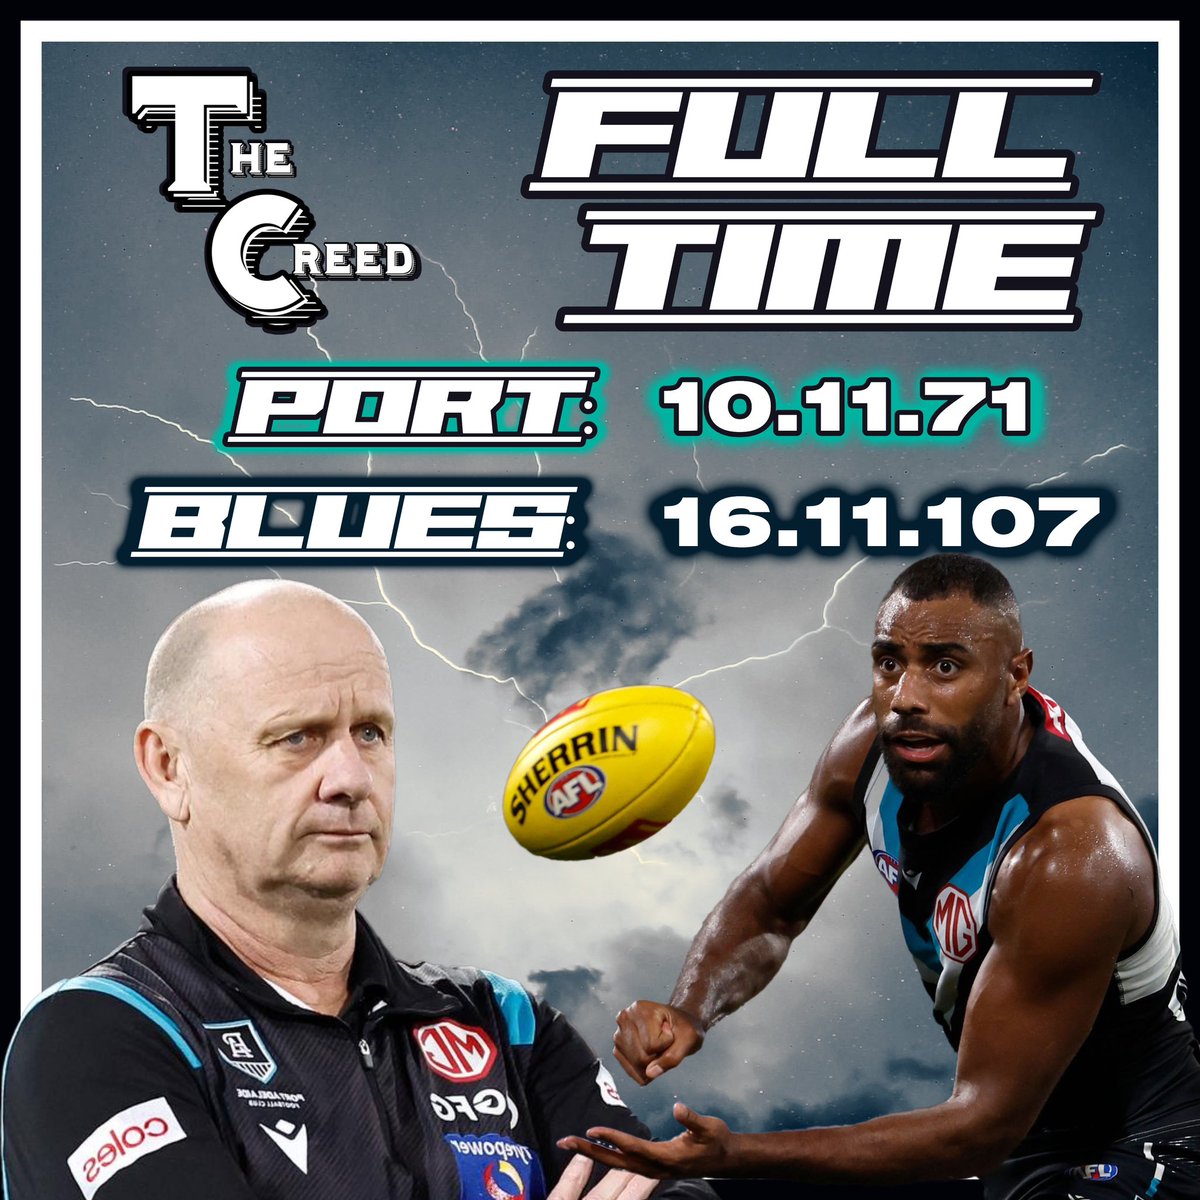 FULL TIME at Adelaide Oval & a test match once again failed. 

A piss poor 4th quarter sees the Blues comfortably home.

It’s getting tiresome. 

#weareportadelaide